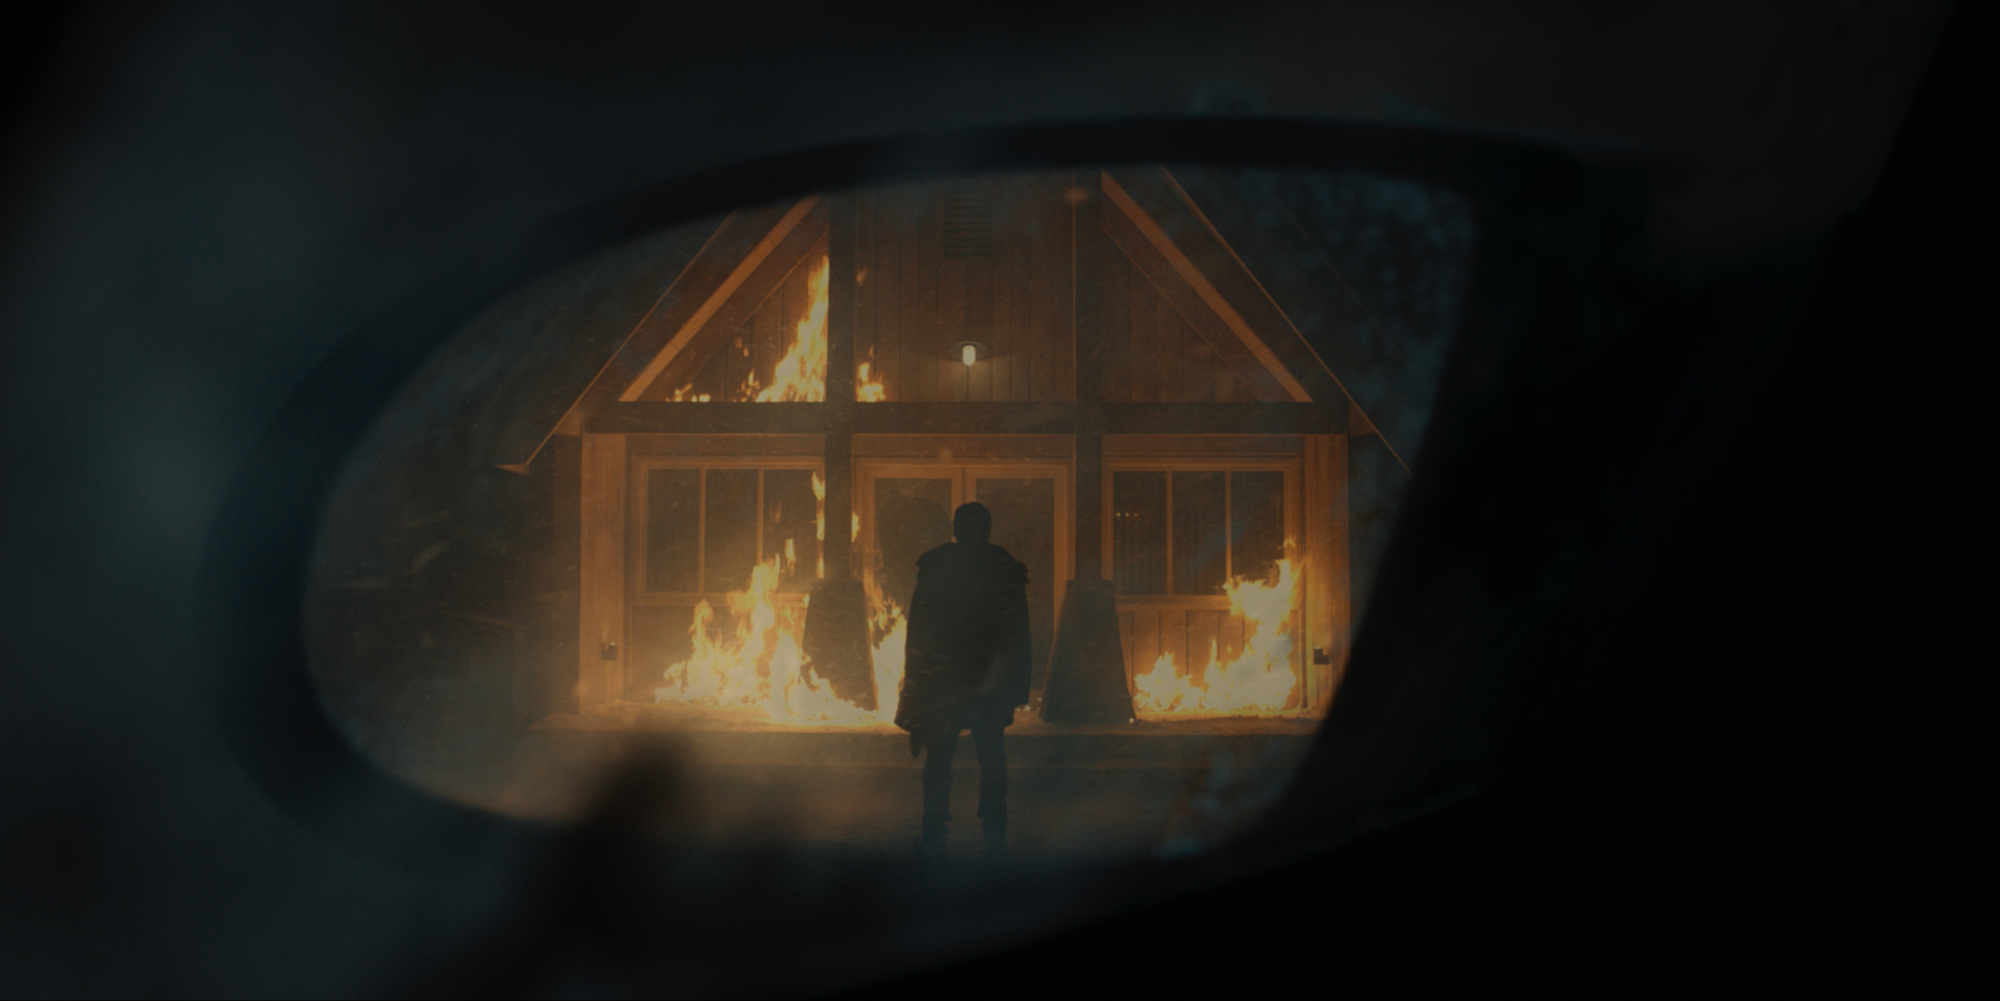 'No Exit' silhouette standing in front of a burning building as seen through a car side mirror